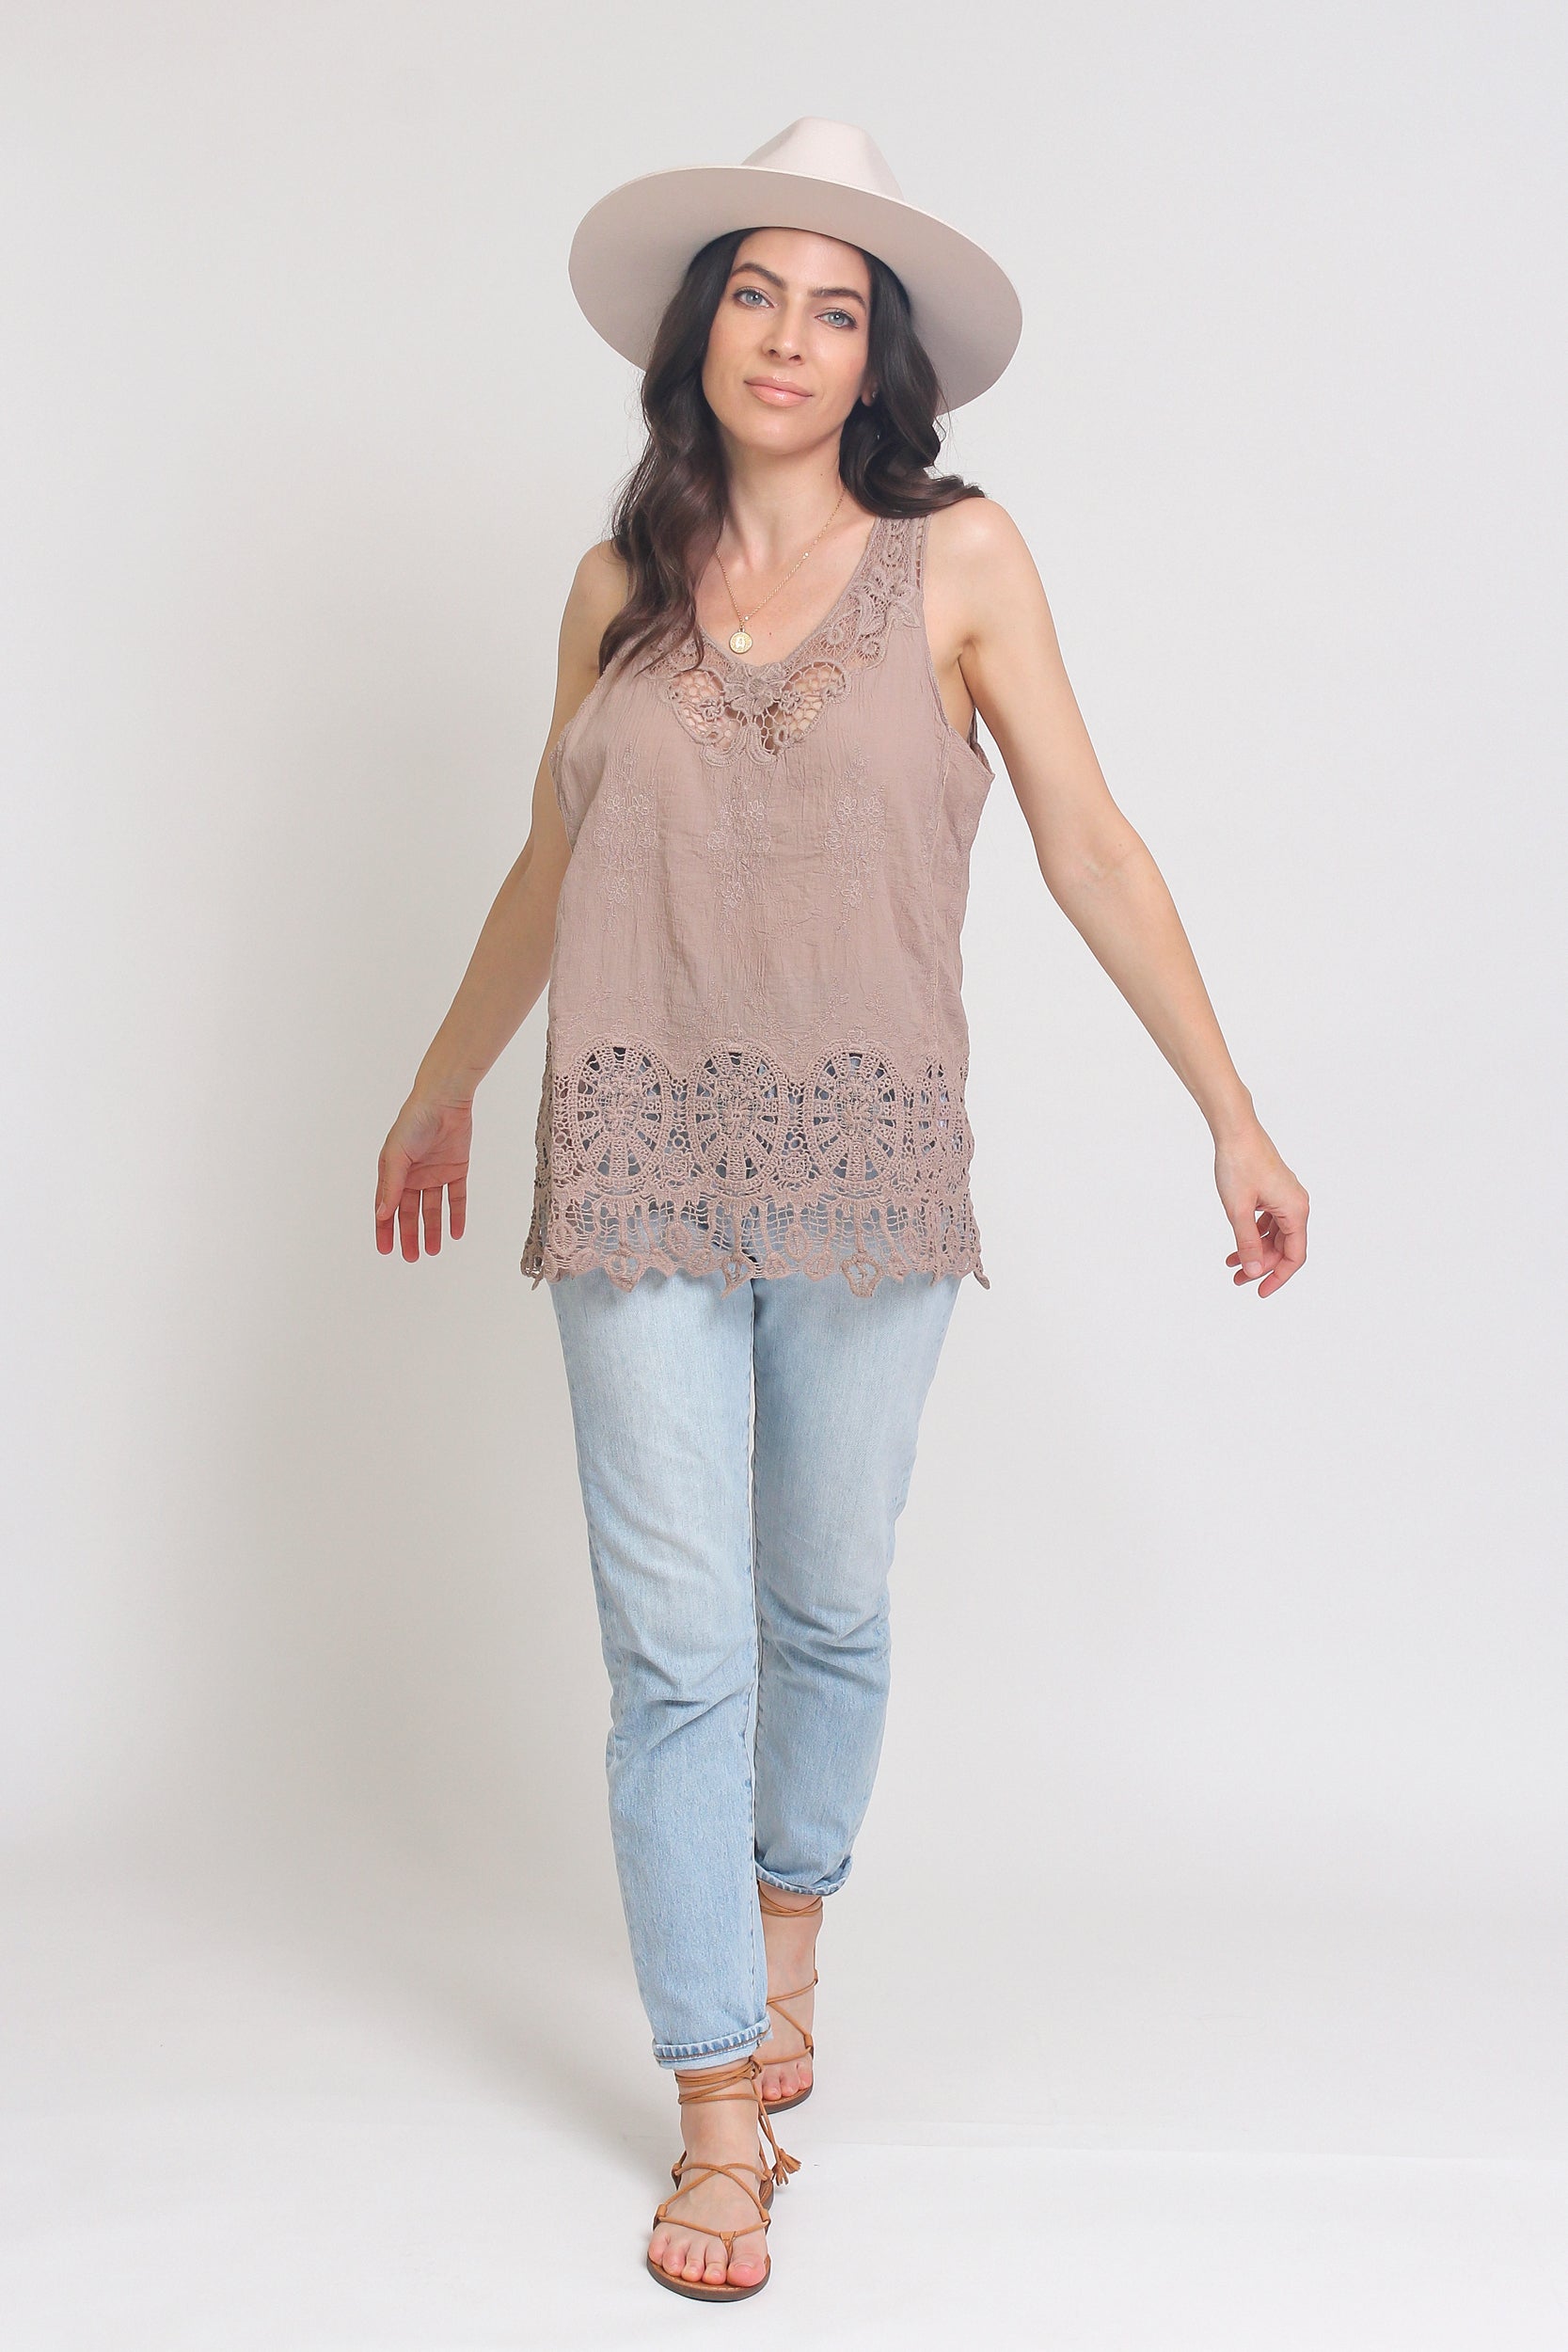 Embroidered top with crochet lace detail, in Mocha. Image 3